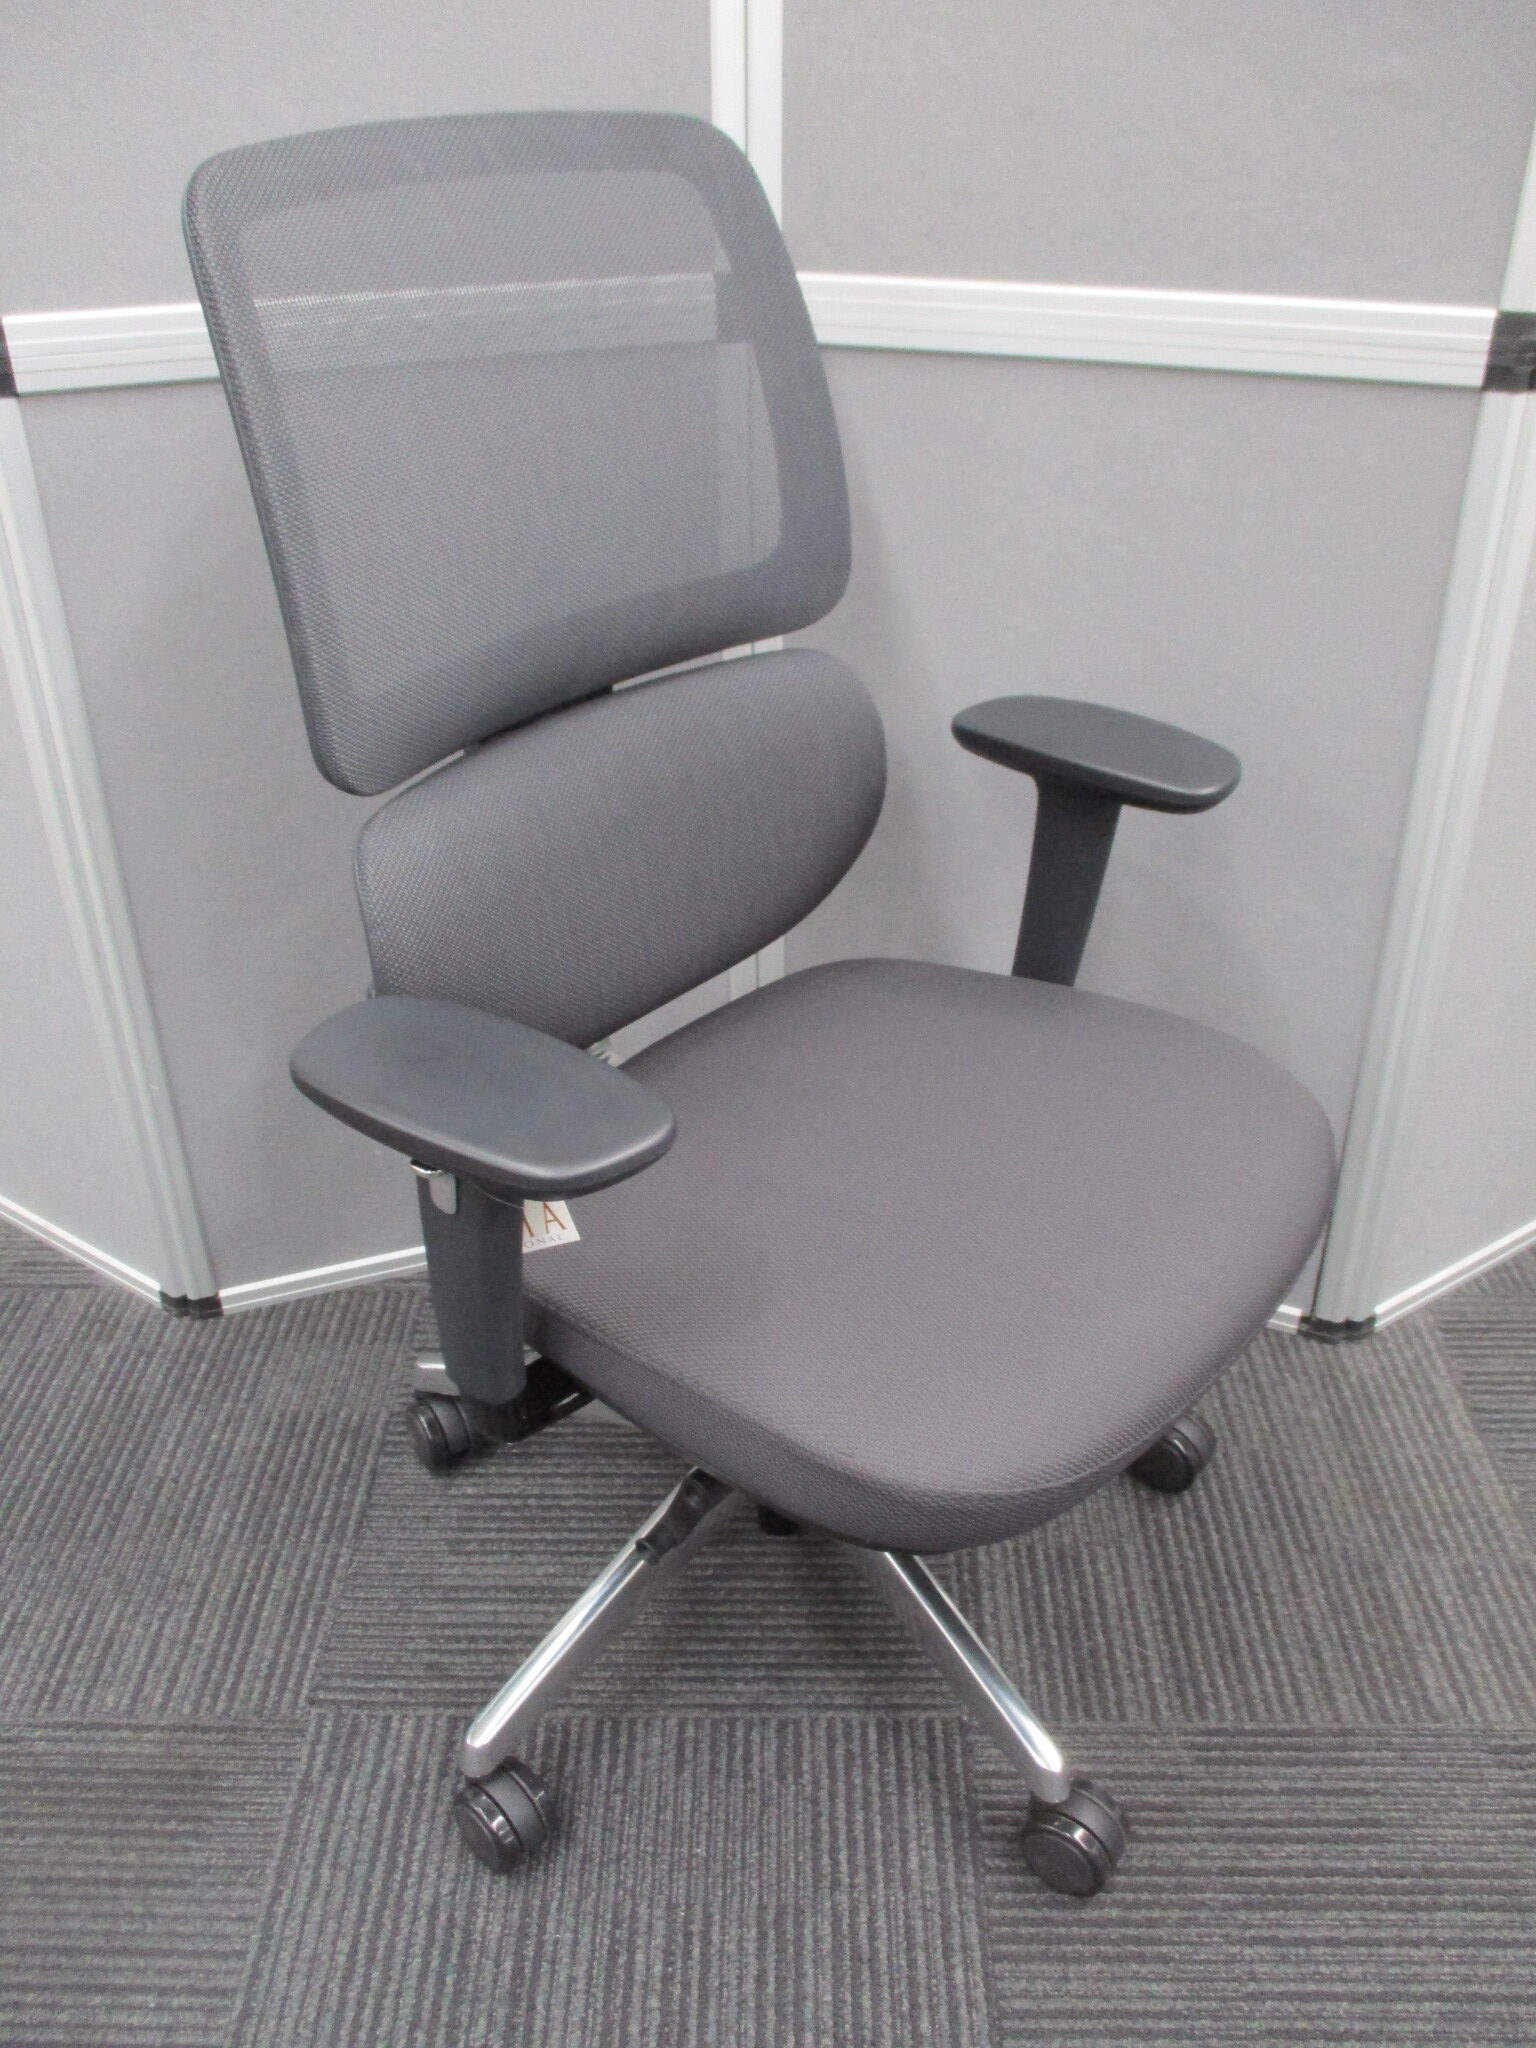 New Orca Chairs $750